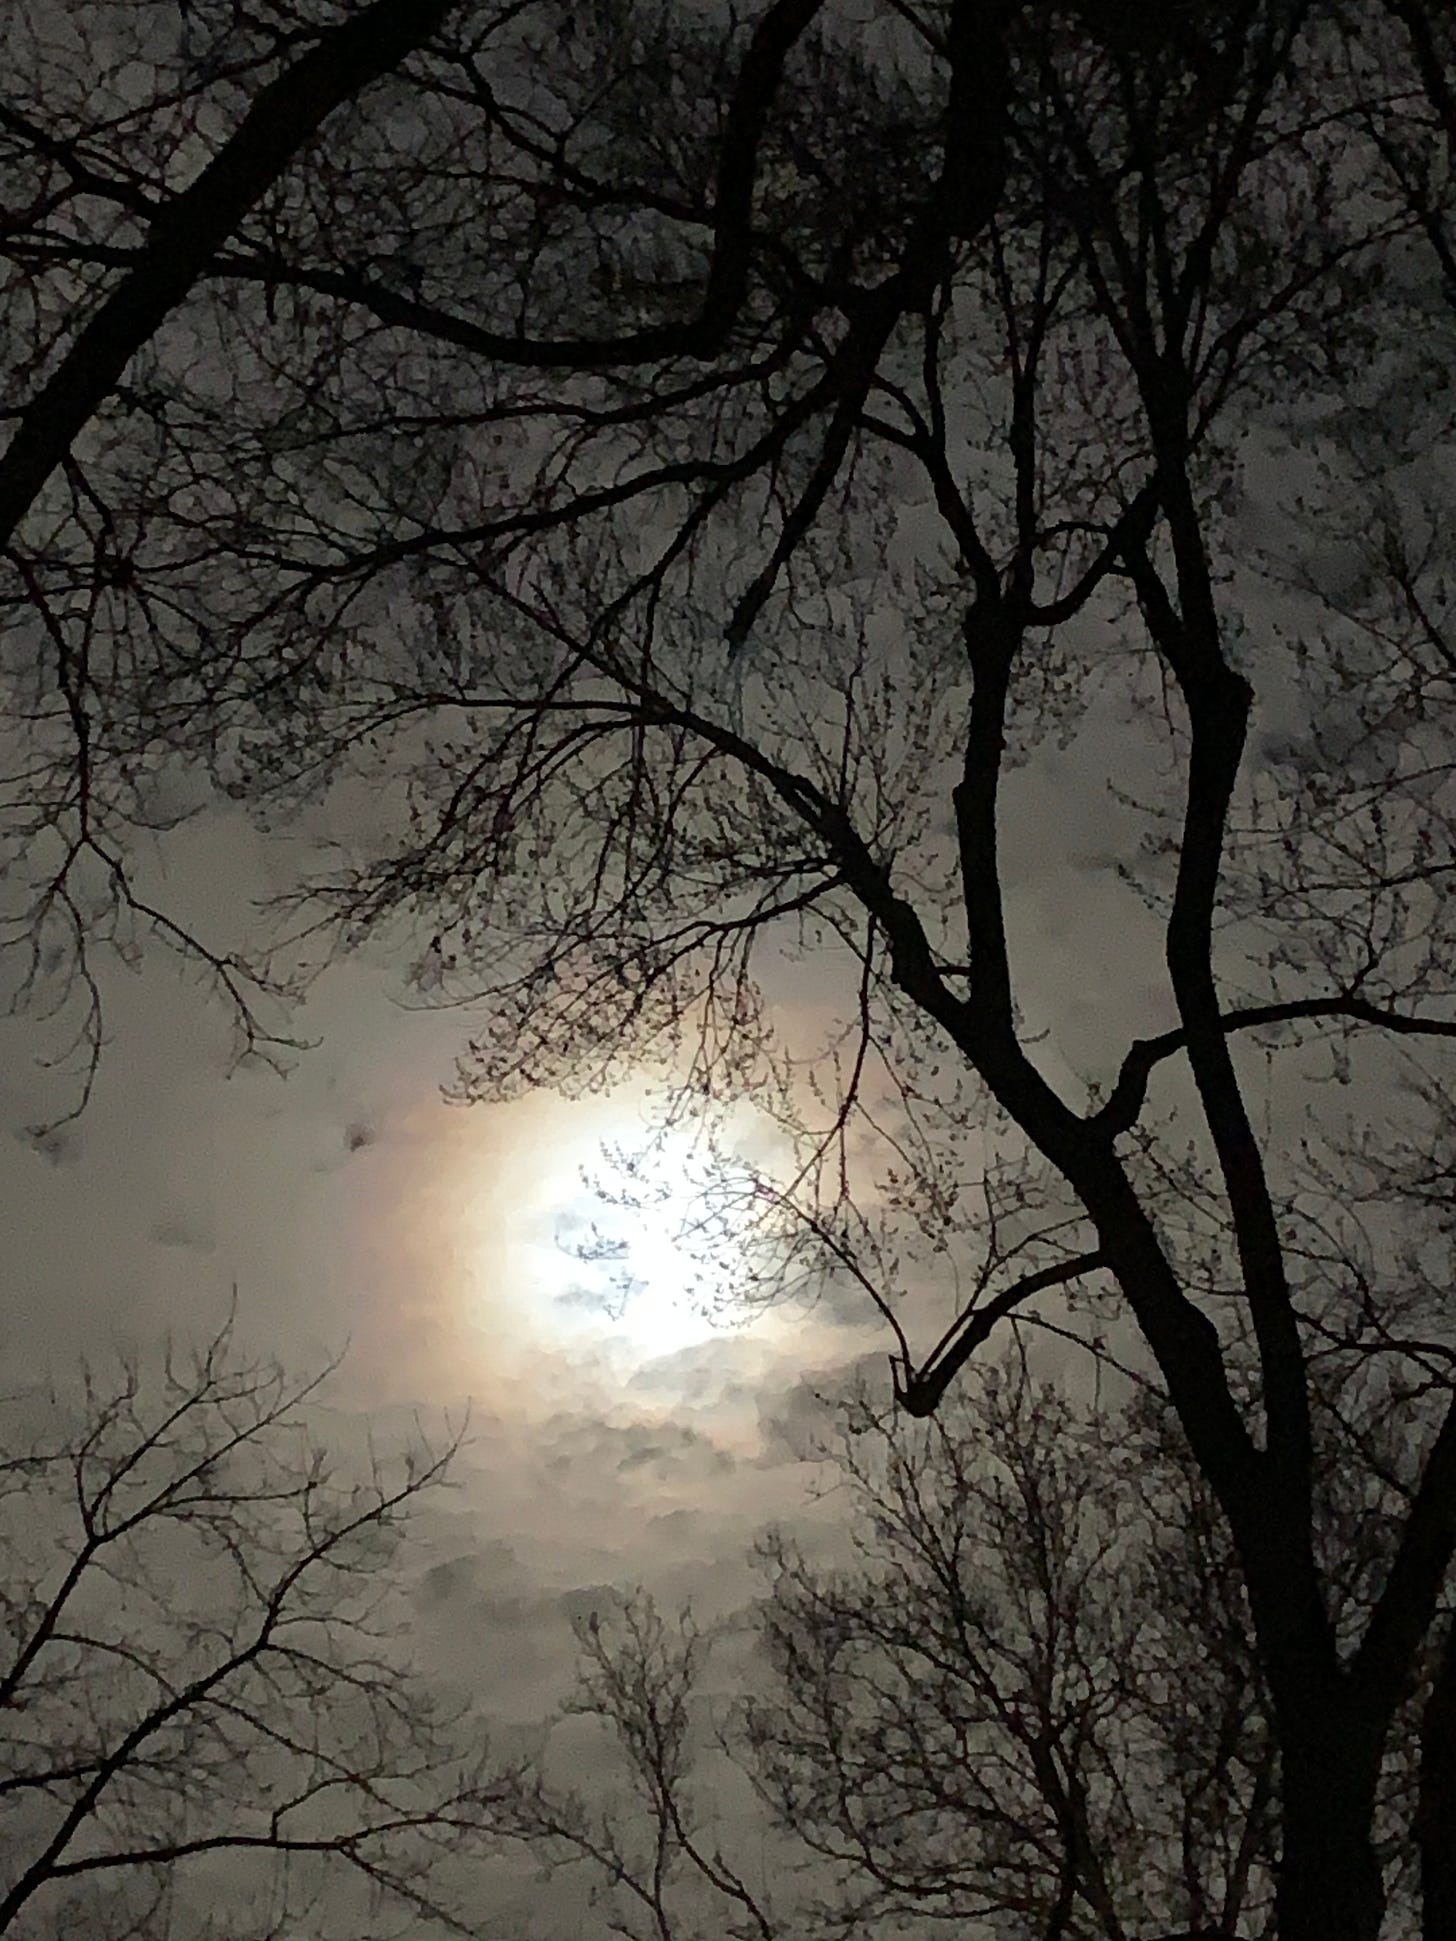 clouds nearly obscure a full moon behind bare trees